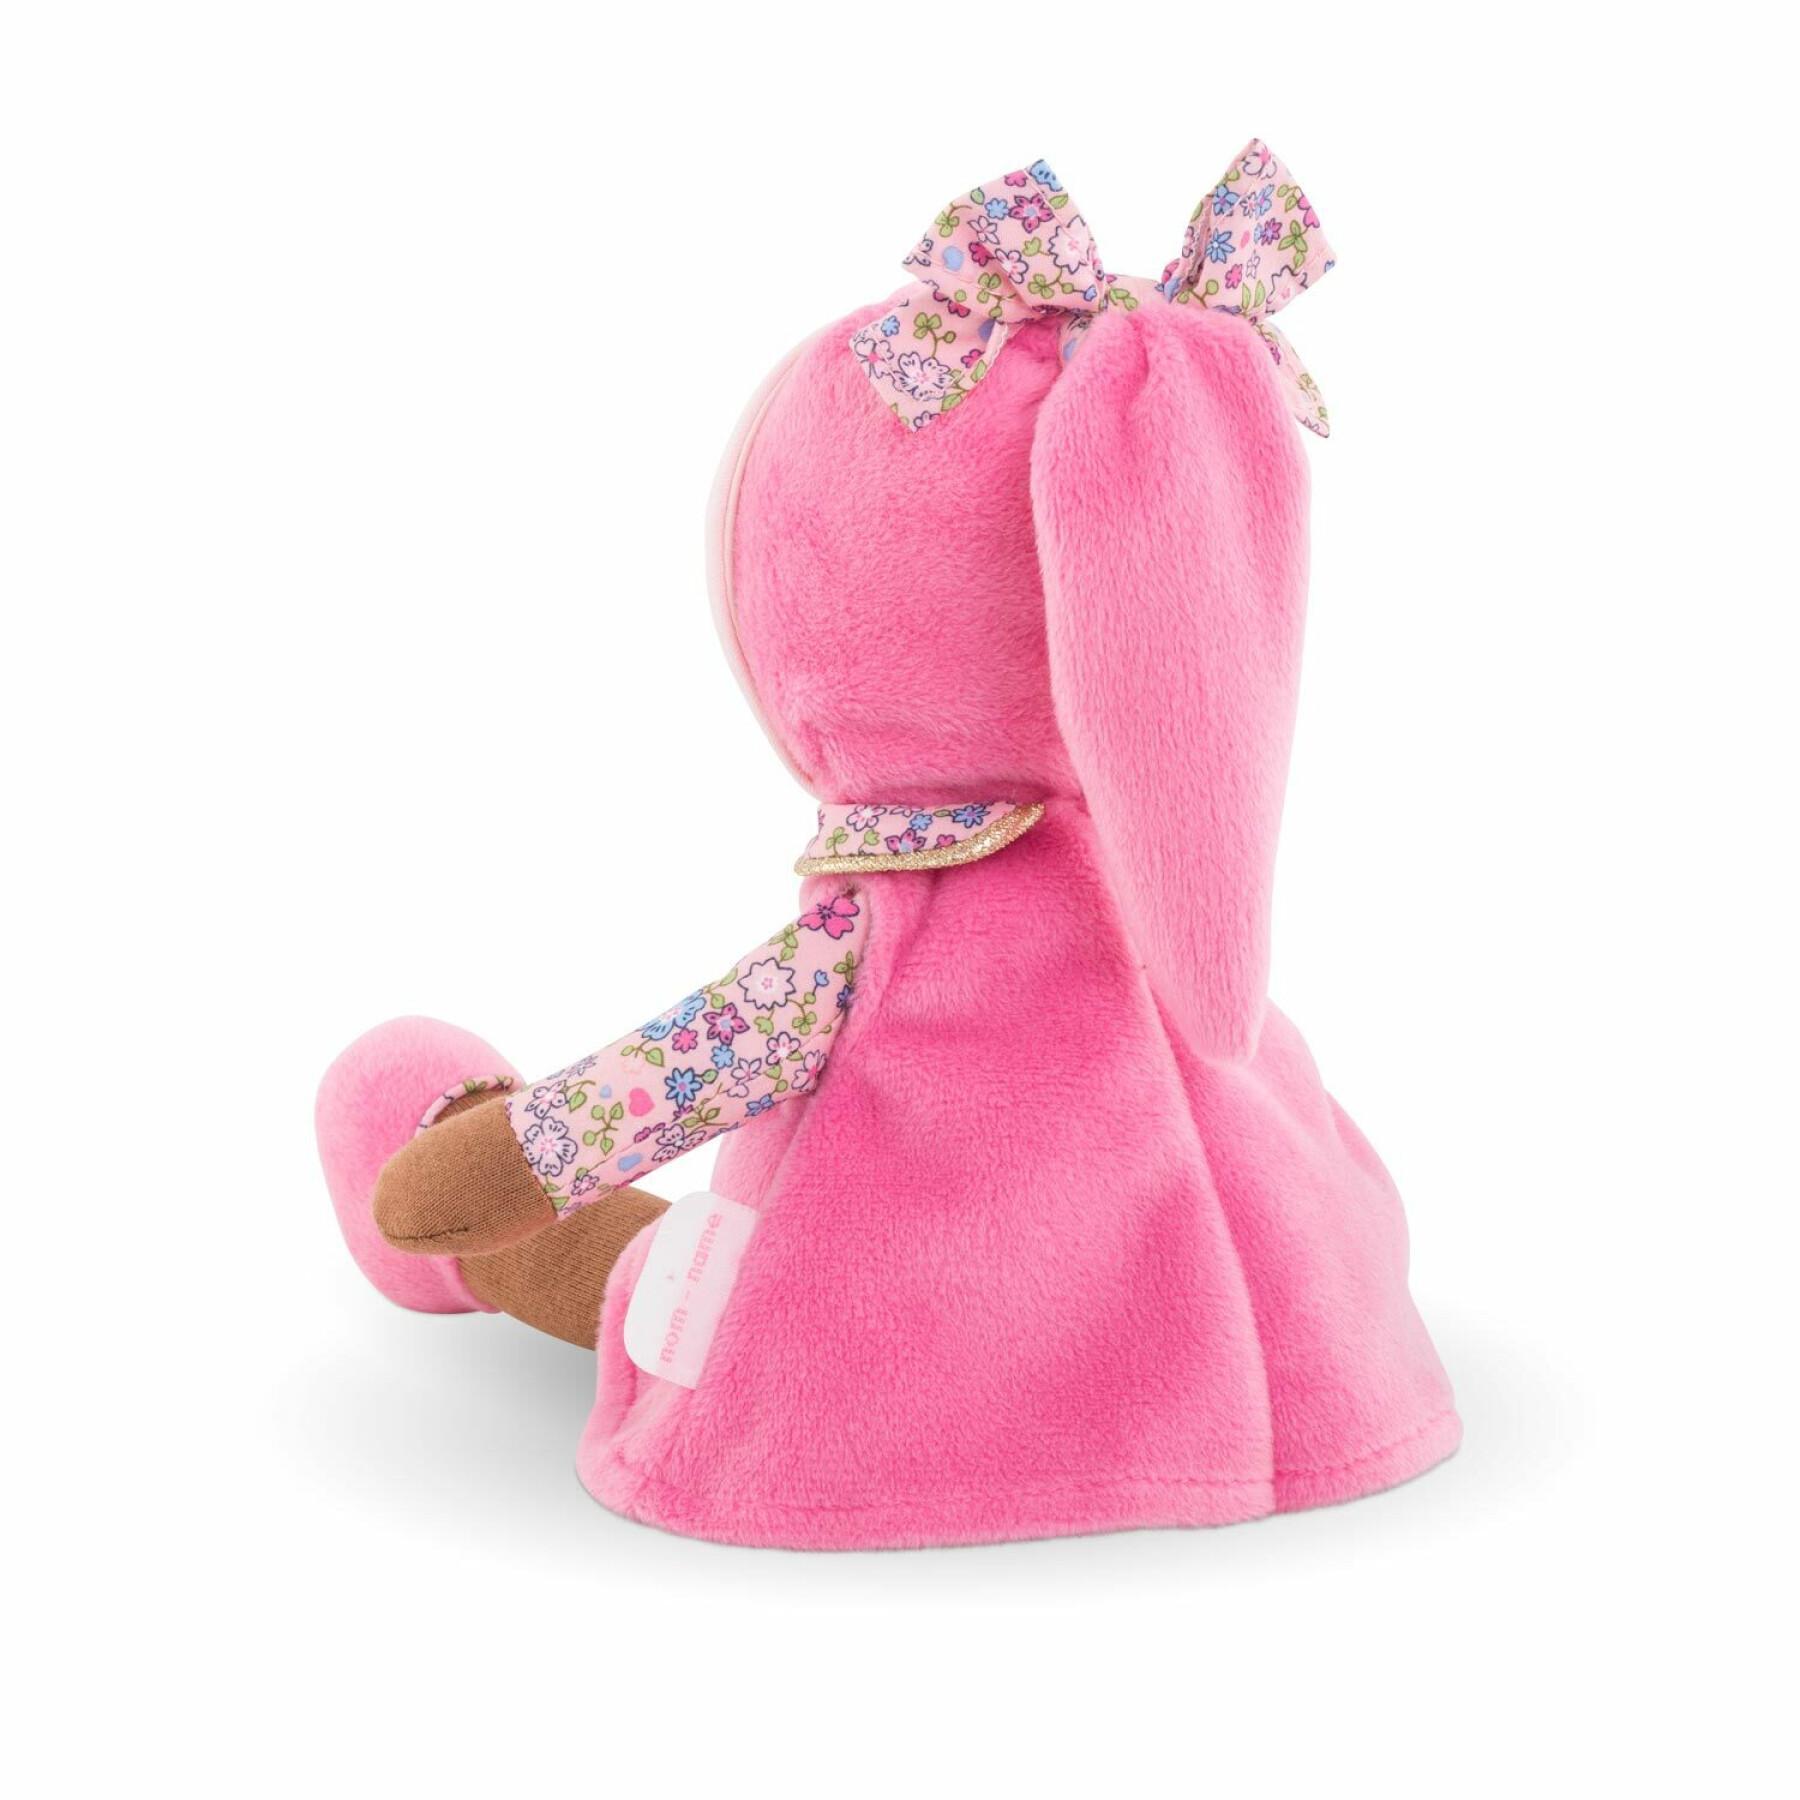 Soft toy miss flower land of dreams